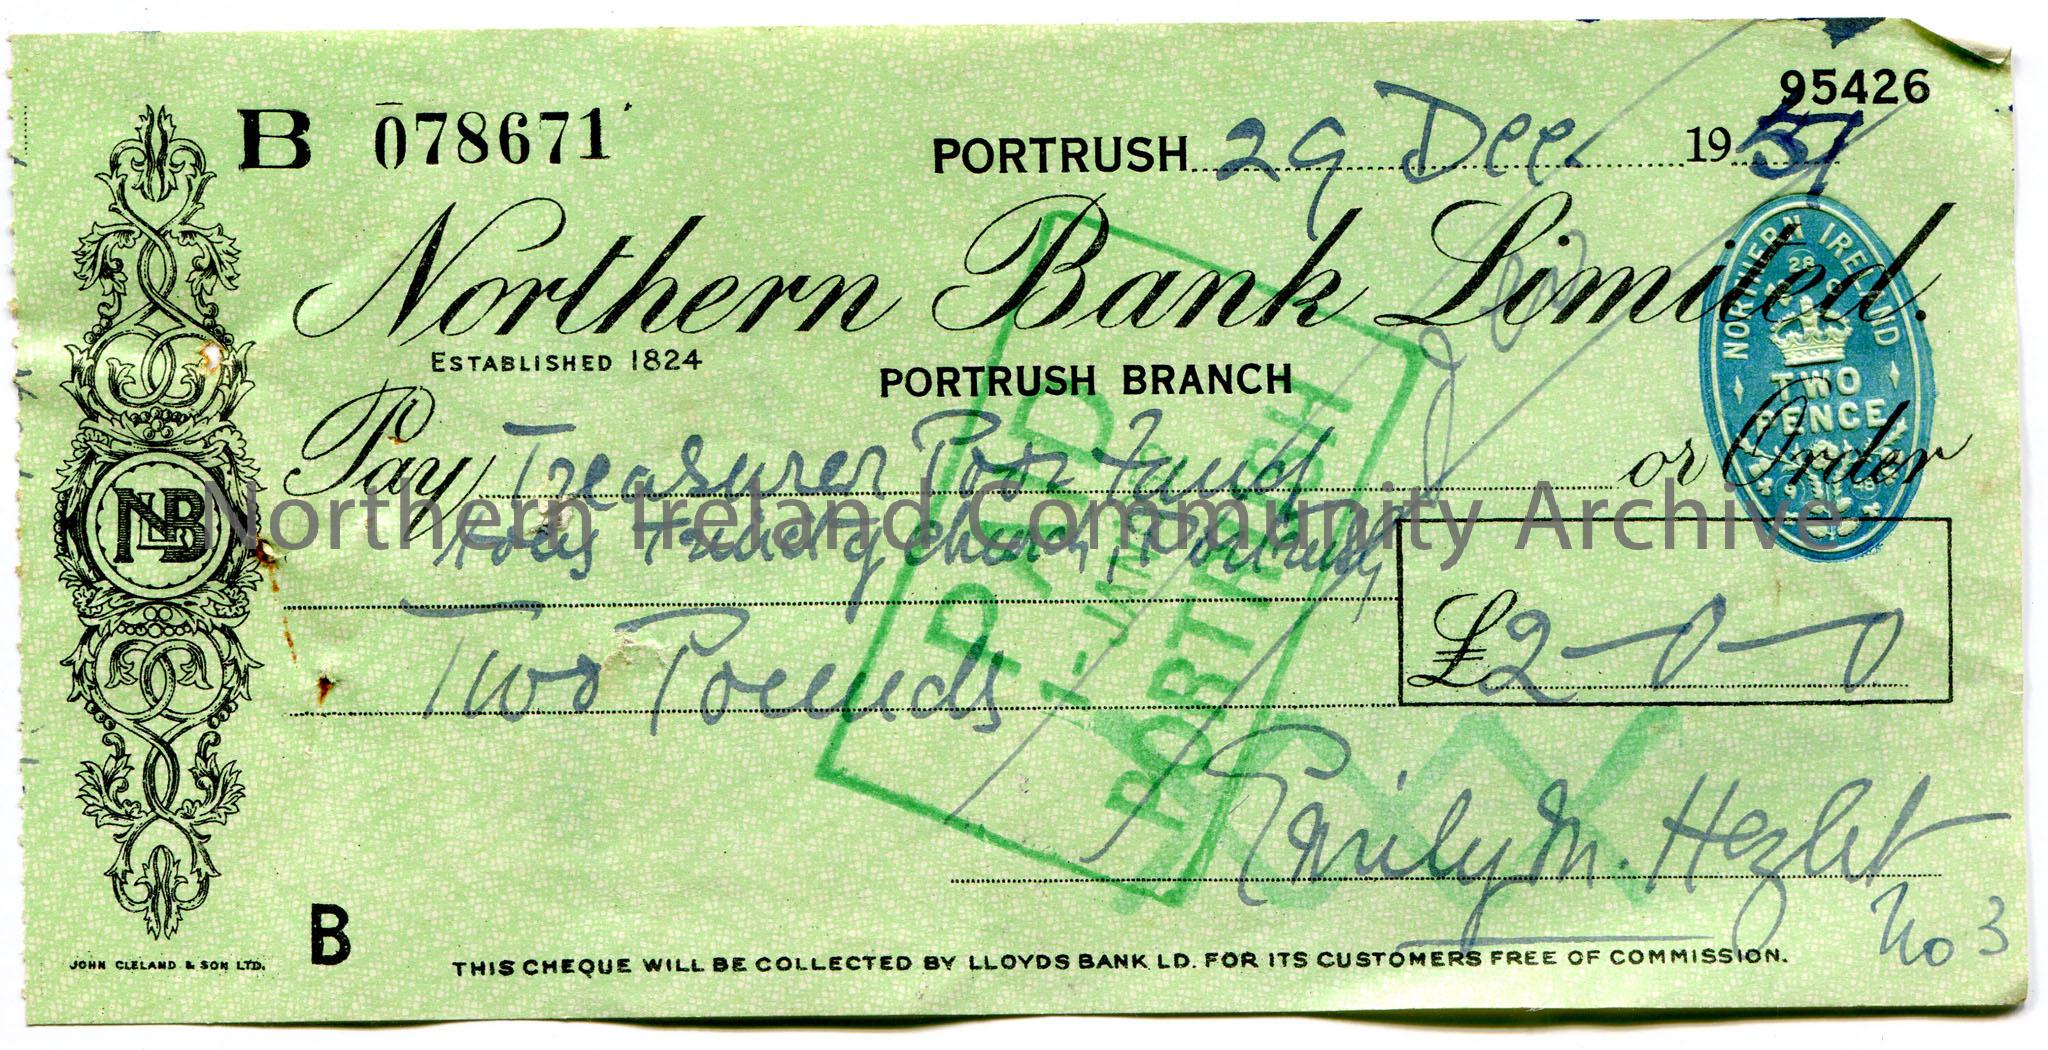 Handwritten Northern Bank Limited, Portrush branch cheque, no 078671. Payable to Treasurer Poor Fund Holy Trinity Church, Portrush from Emily M. Hezle…